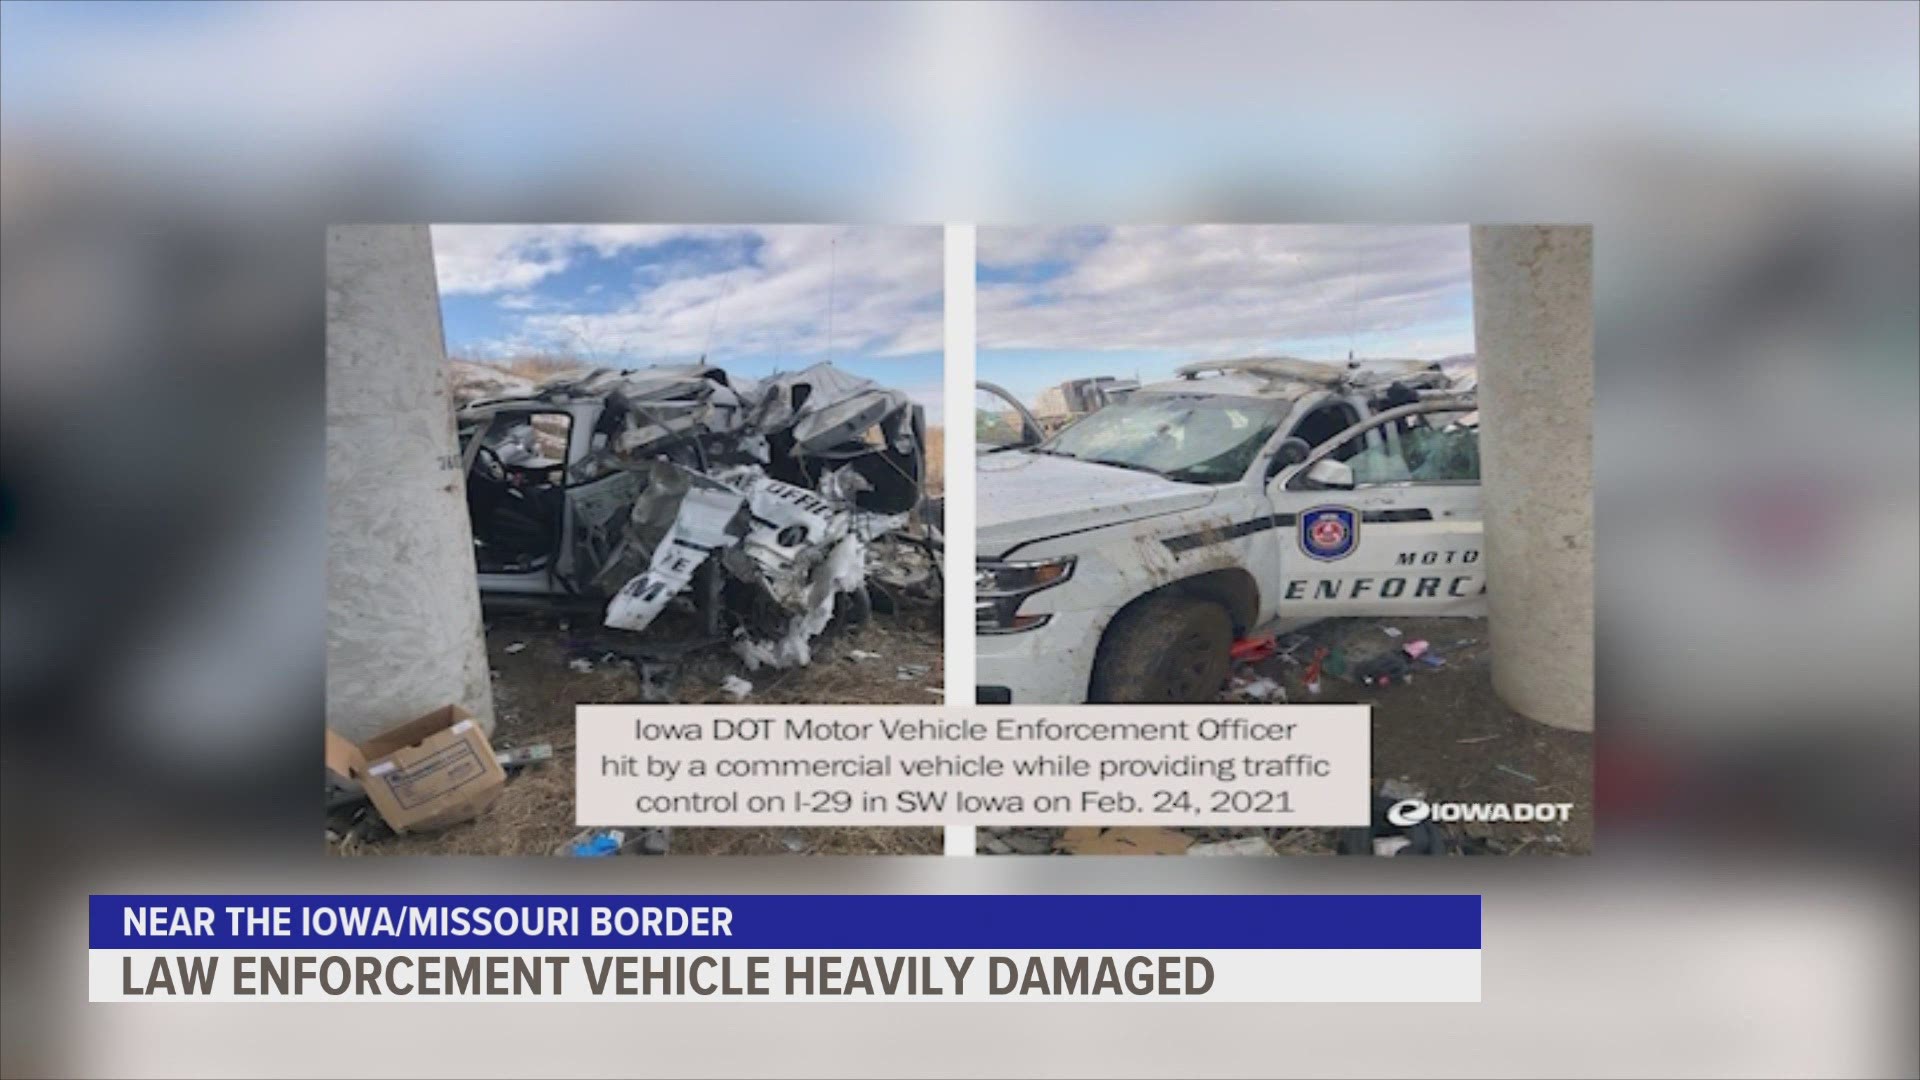 The Iowa DOT said one of their motor vehicle enforcement vehicles was hit in a crash this week.